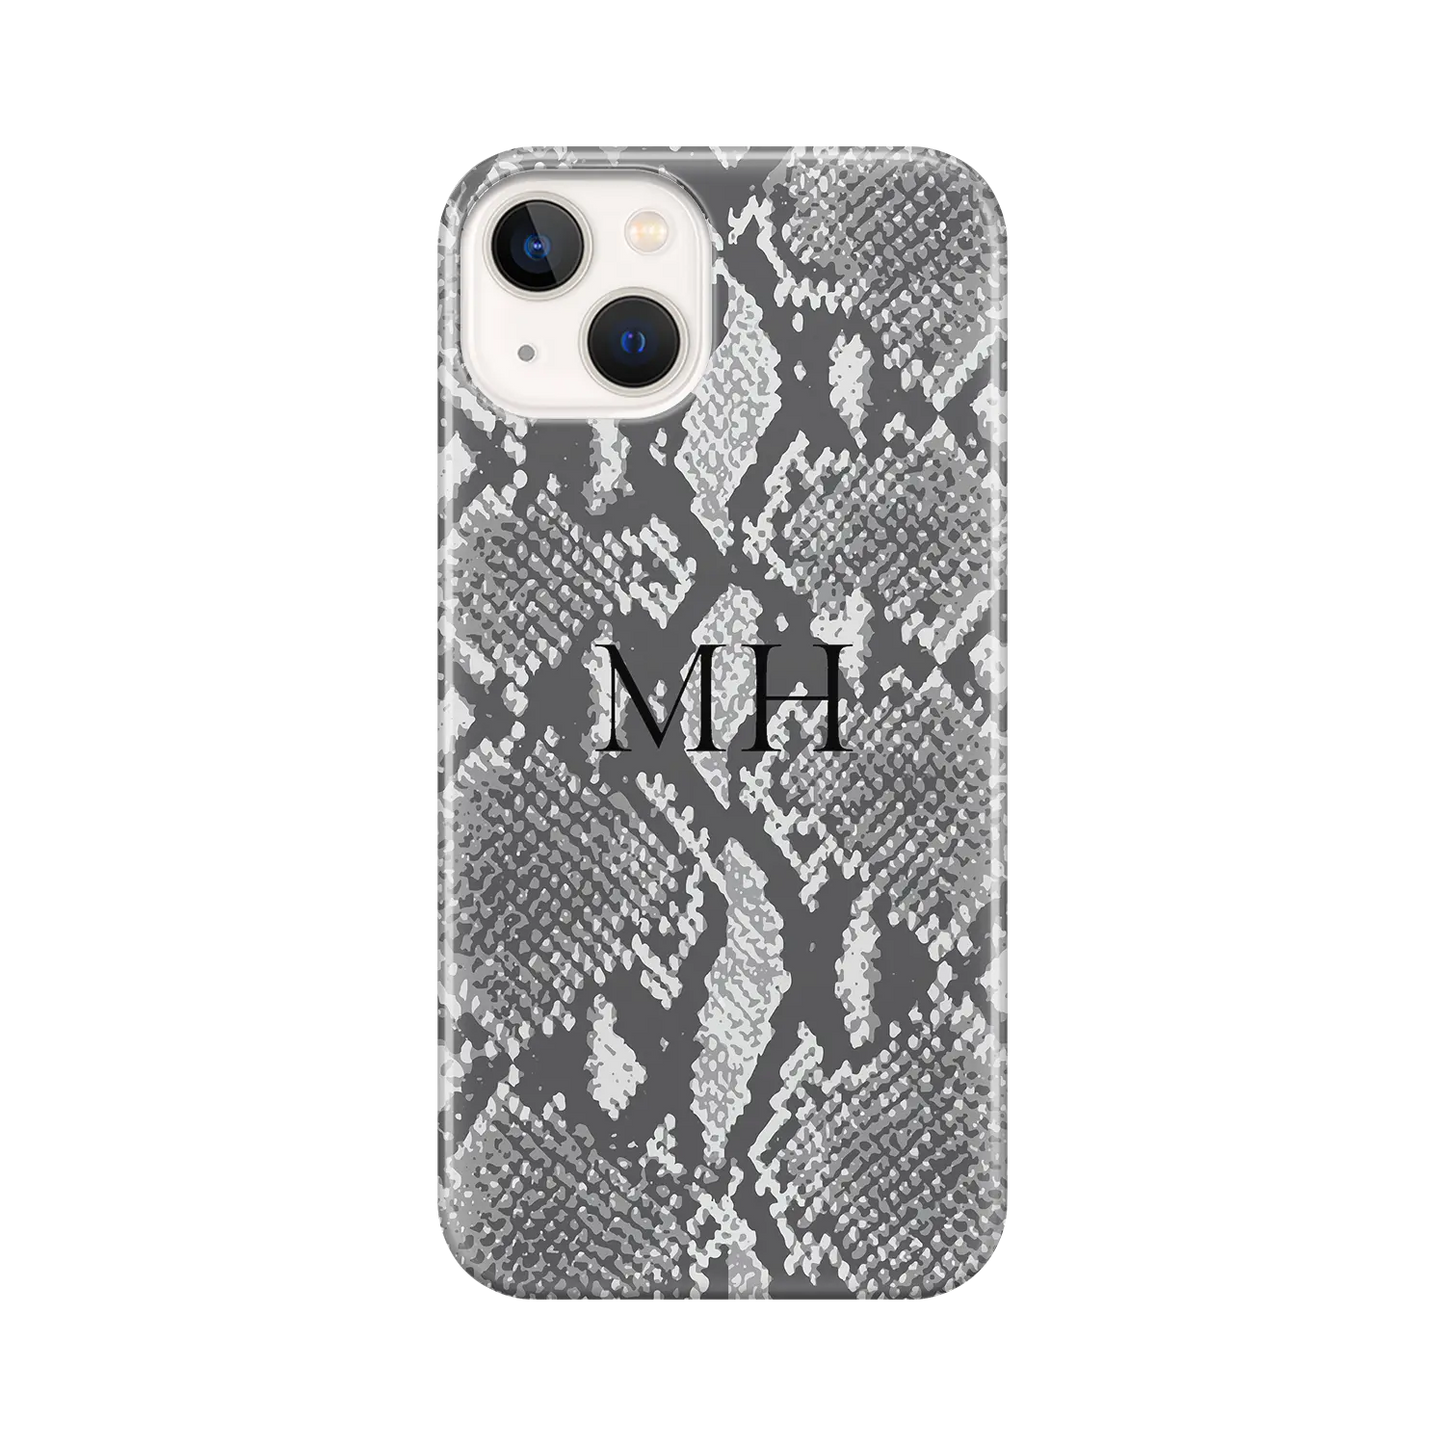 Oh Snake! - Personalised iPhone Case